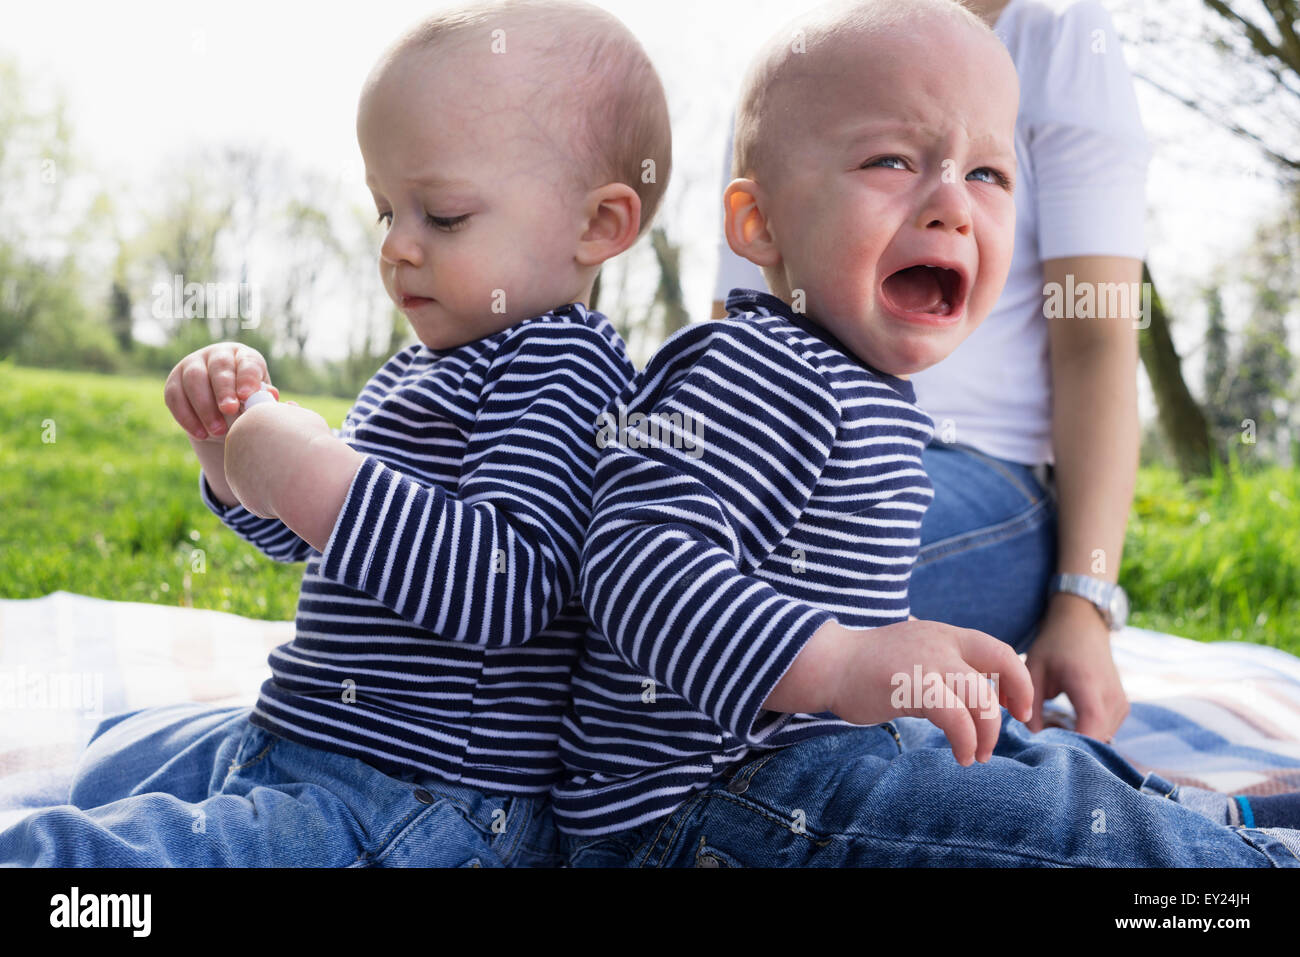 Baby twin brothers back to back on picnic blanket in field Stock Photo